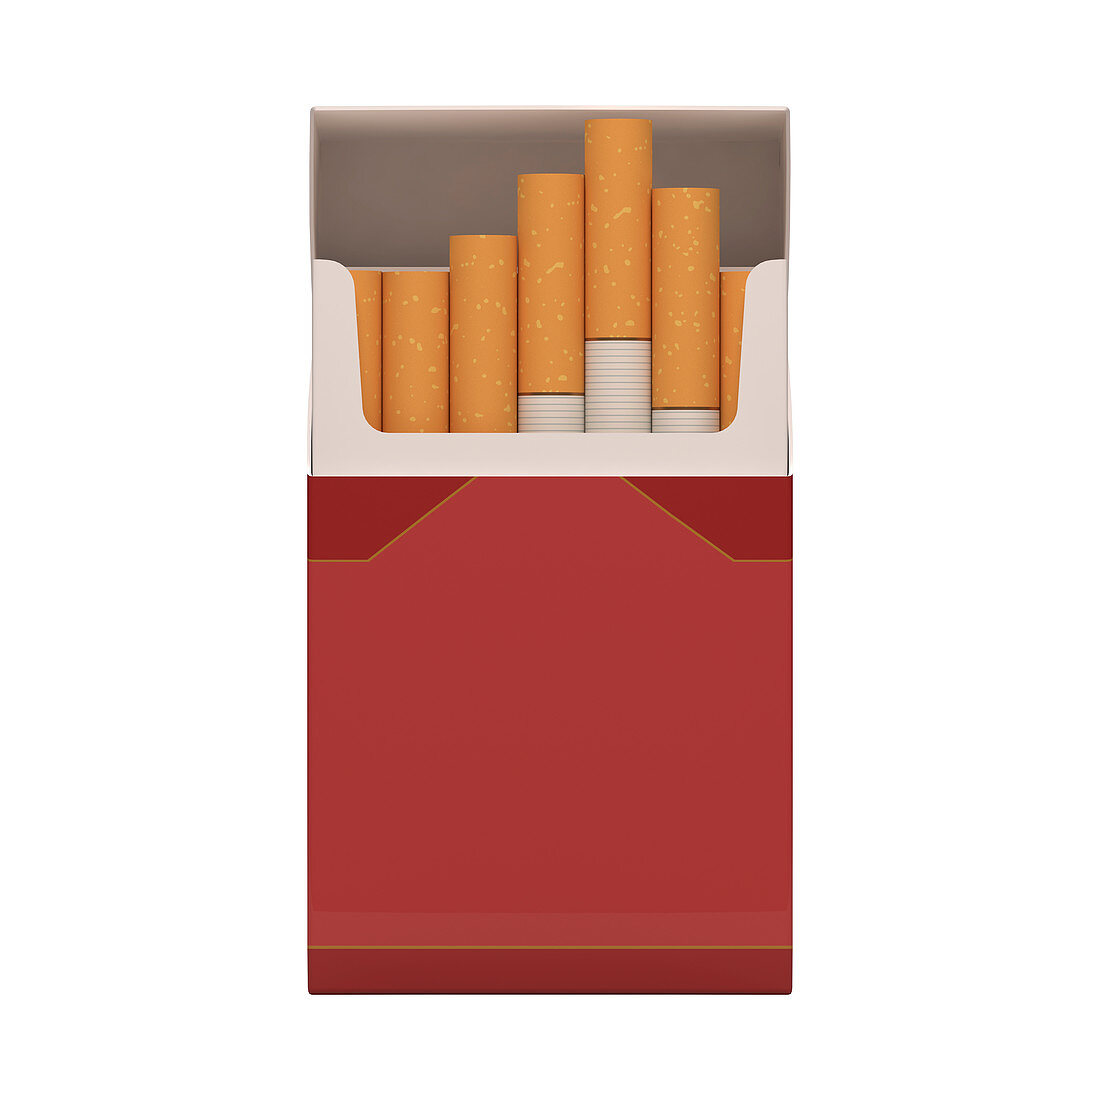 Packet of cigarettes